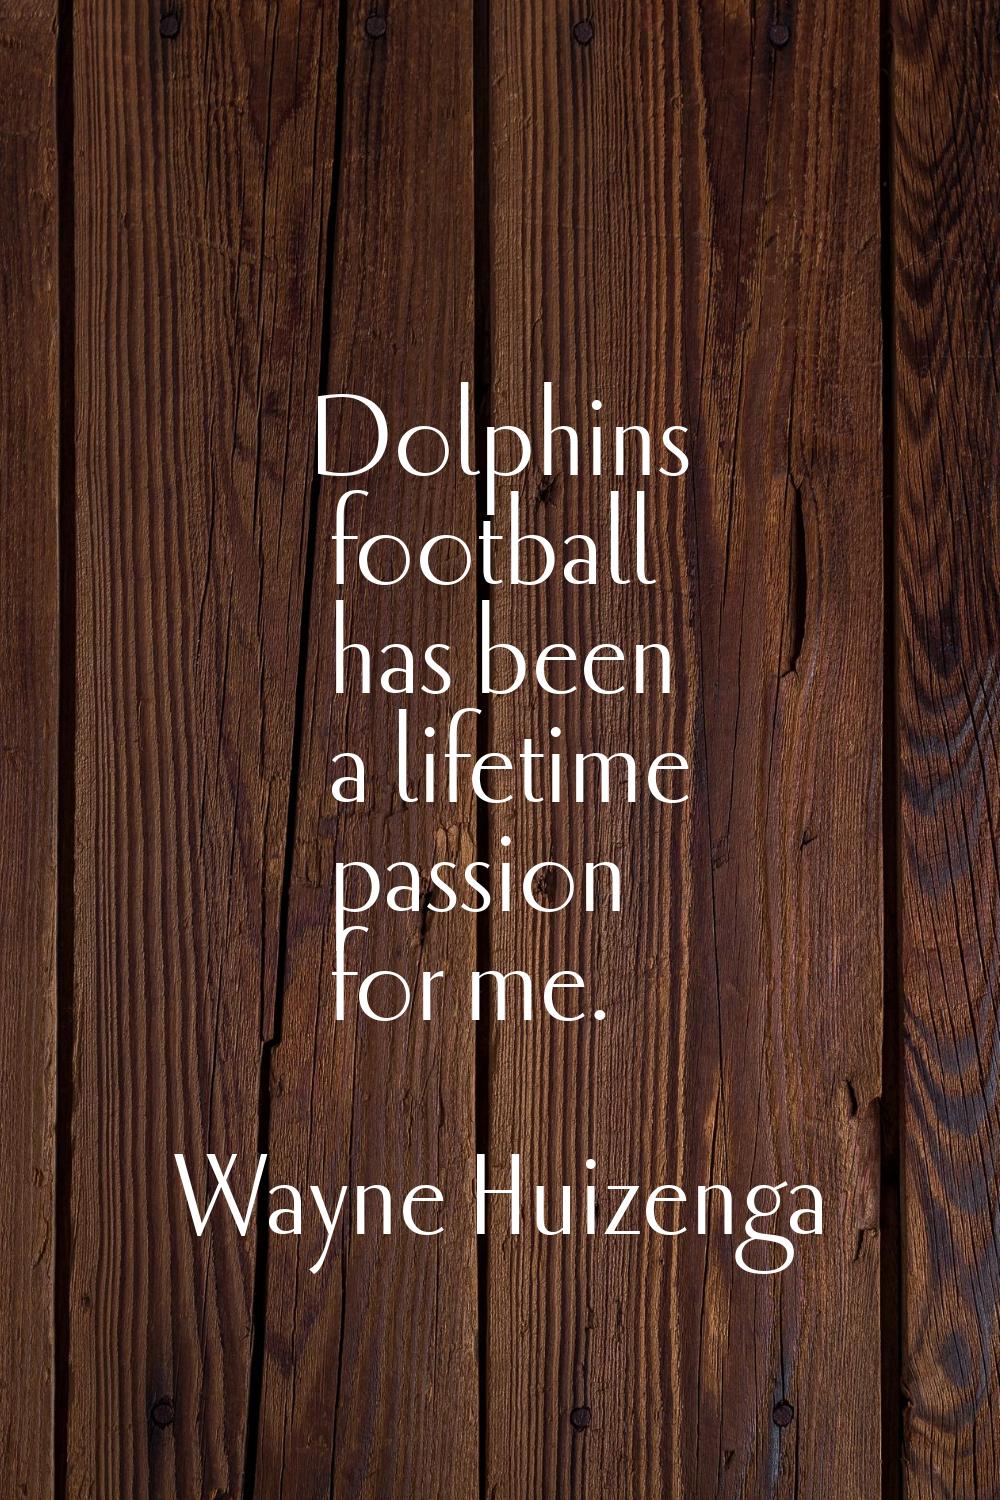 Dolphins football has been a lifetime passion for me.